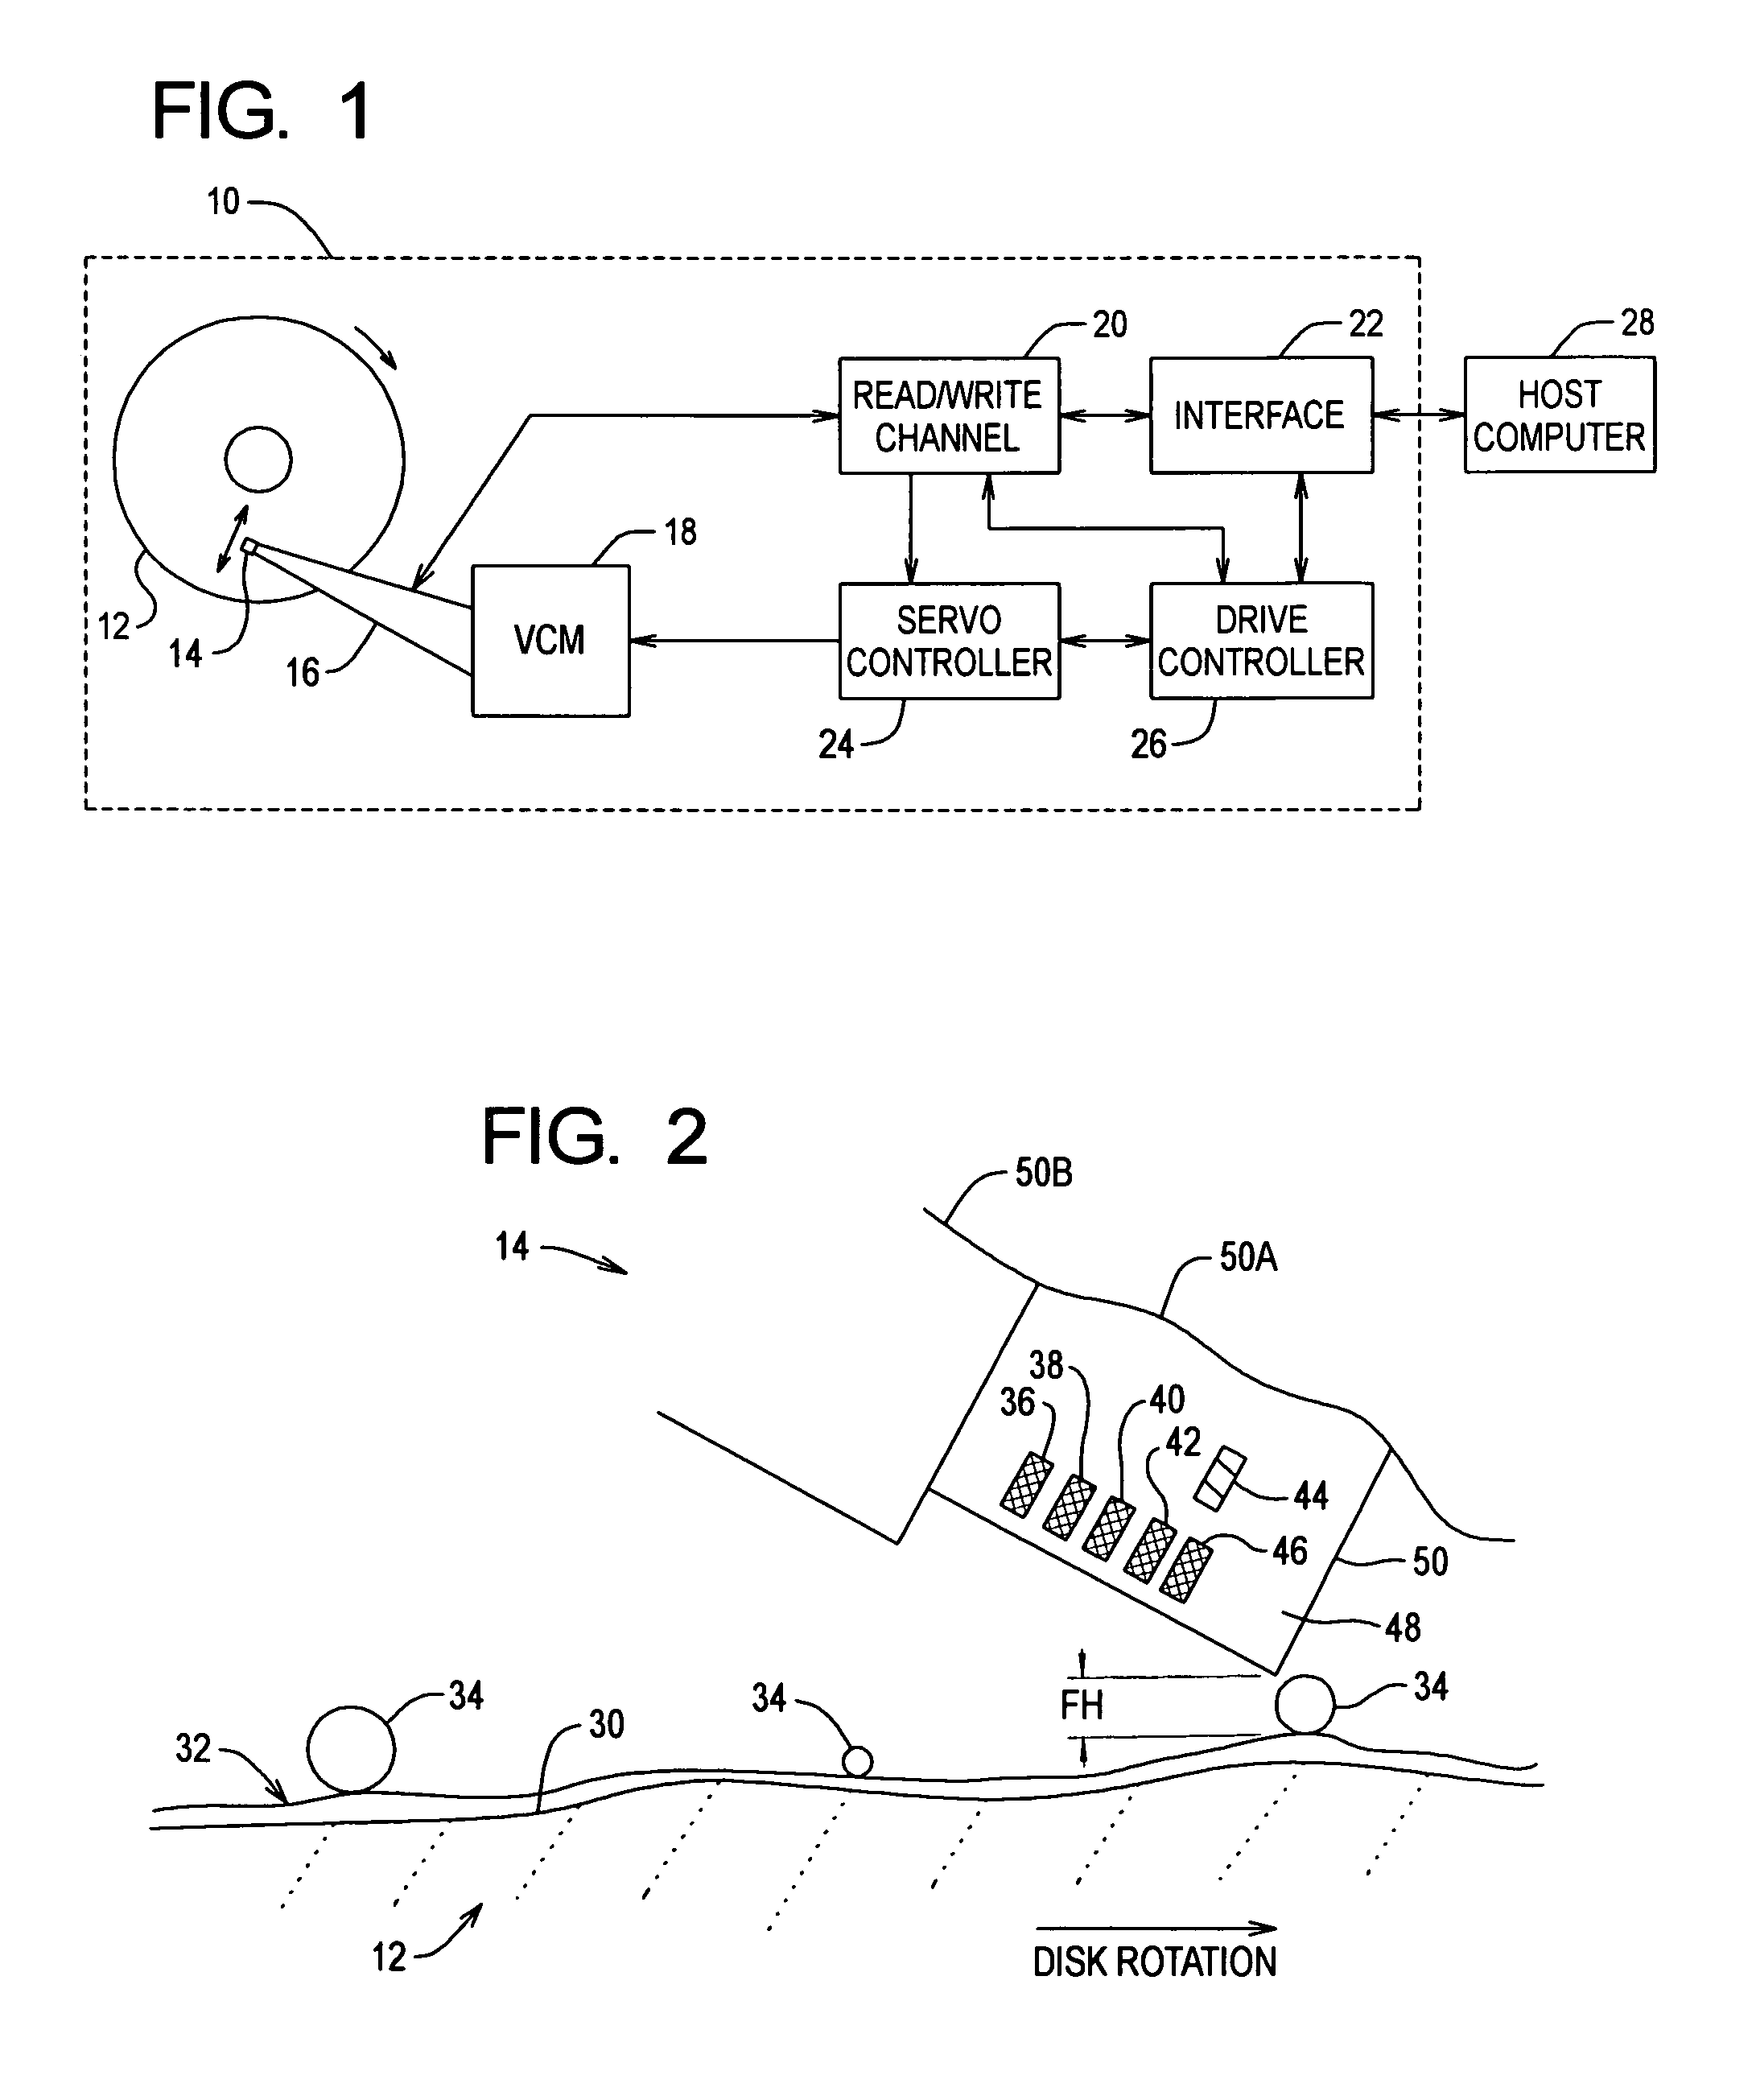 Head-disk interface preconditioning using write current before servo track write